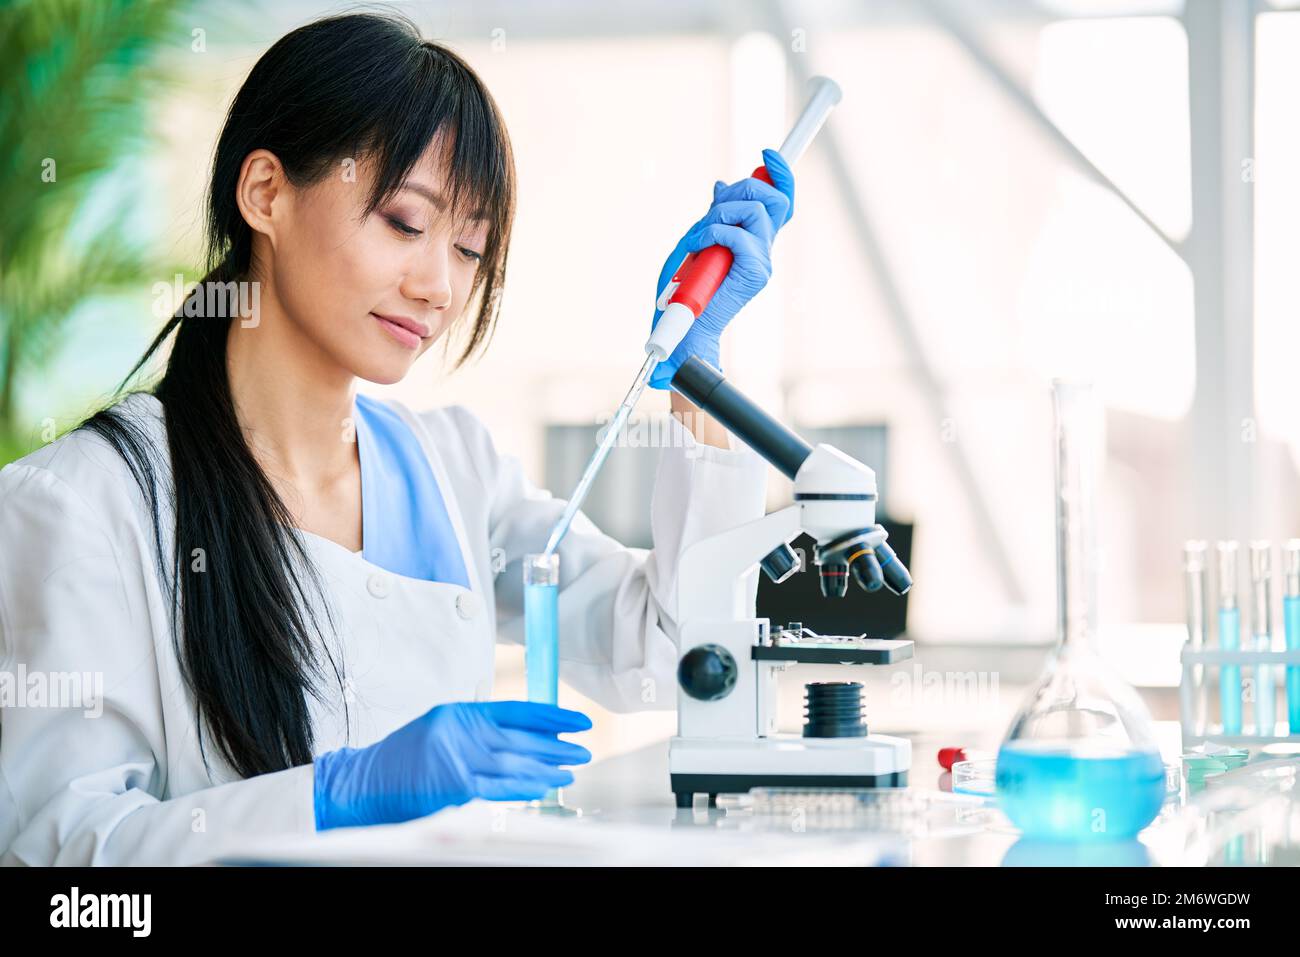 Beautiful female scientist preparing and analyzing microscope slides working in modern science laboratory. Stock Photo